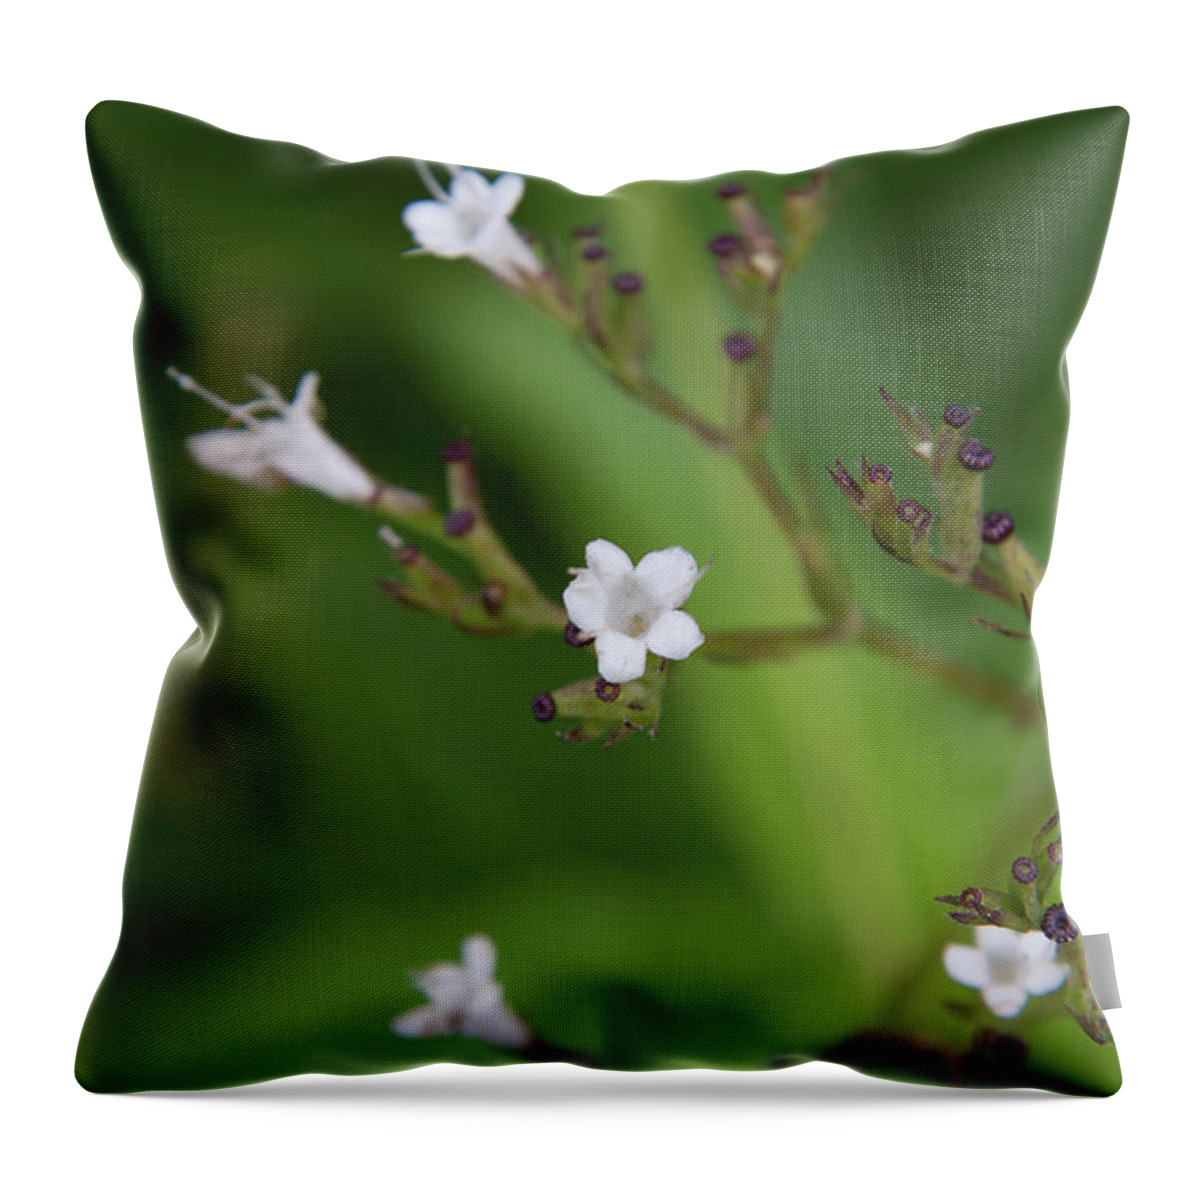 Nature Throw Pillow featuring the photograph Flower 1 by Mati Krimerman